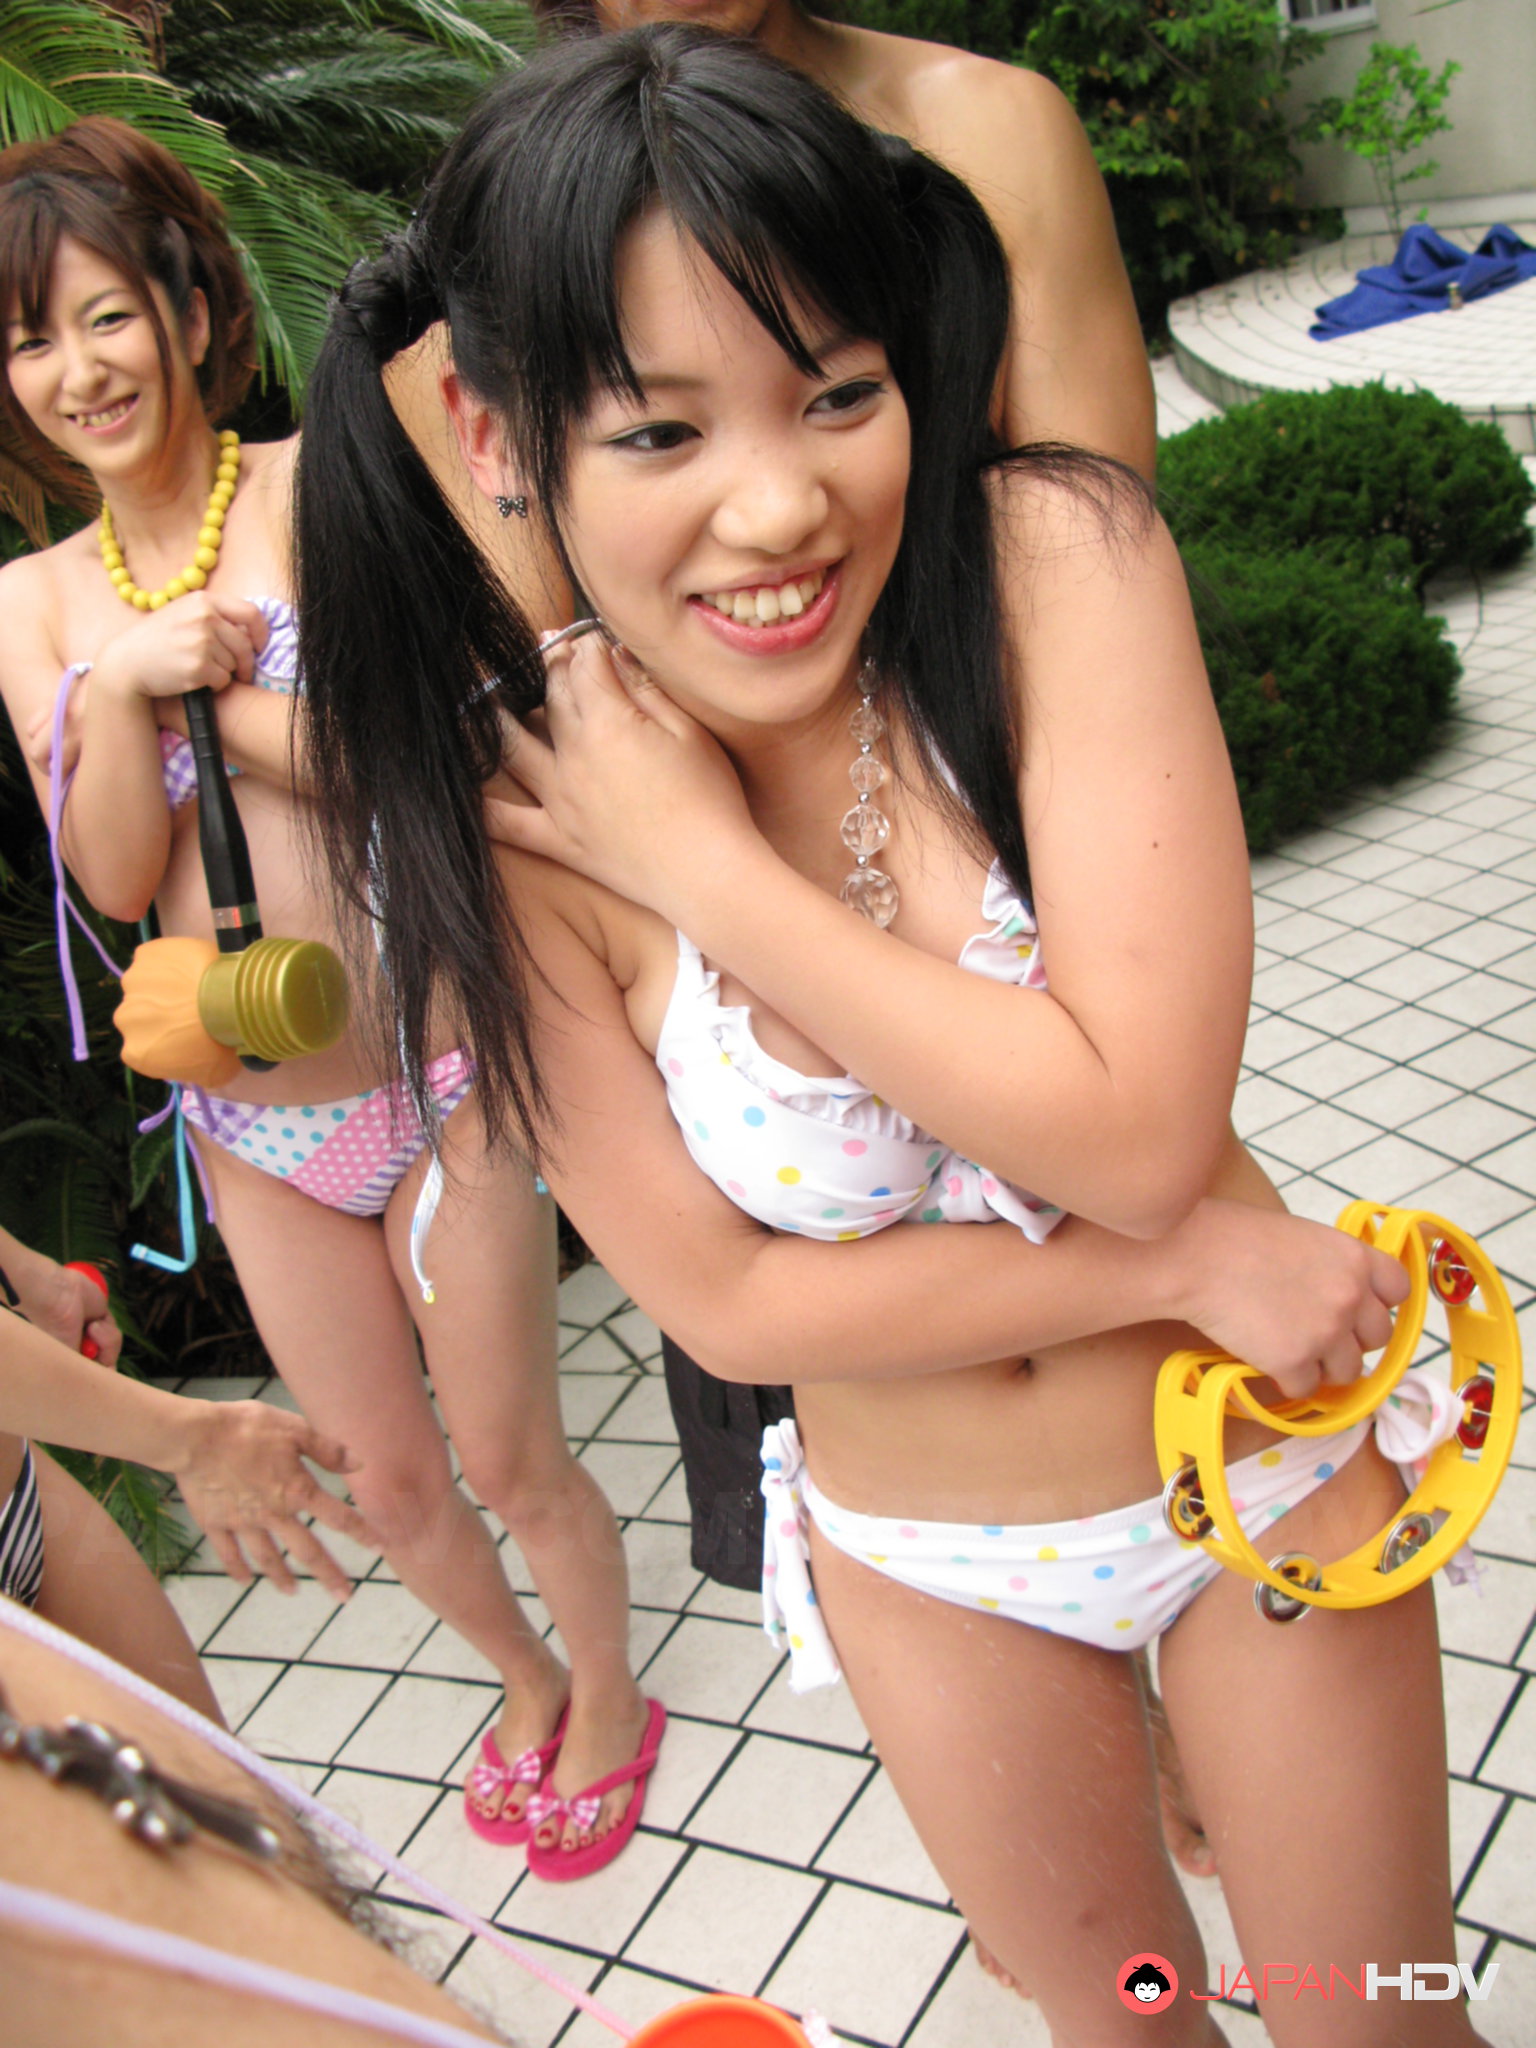 Pussy Pool Party - Japanese girls enjoy in some sexy pool party